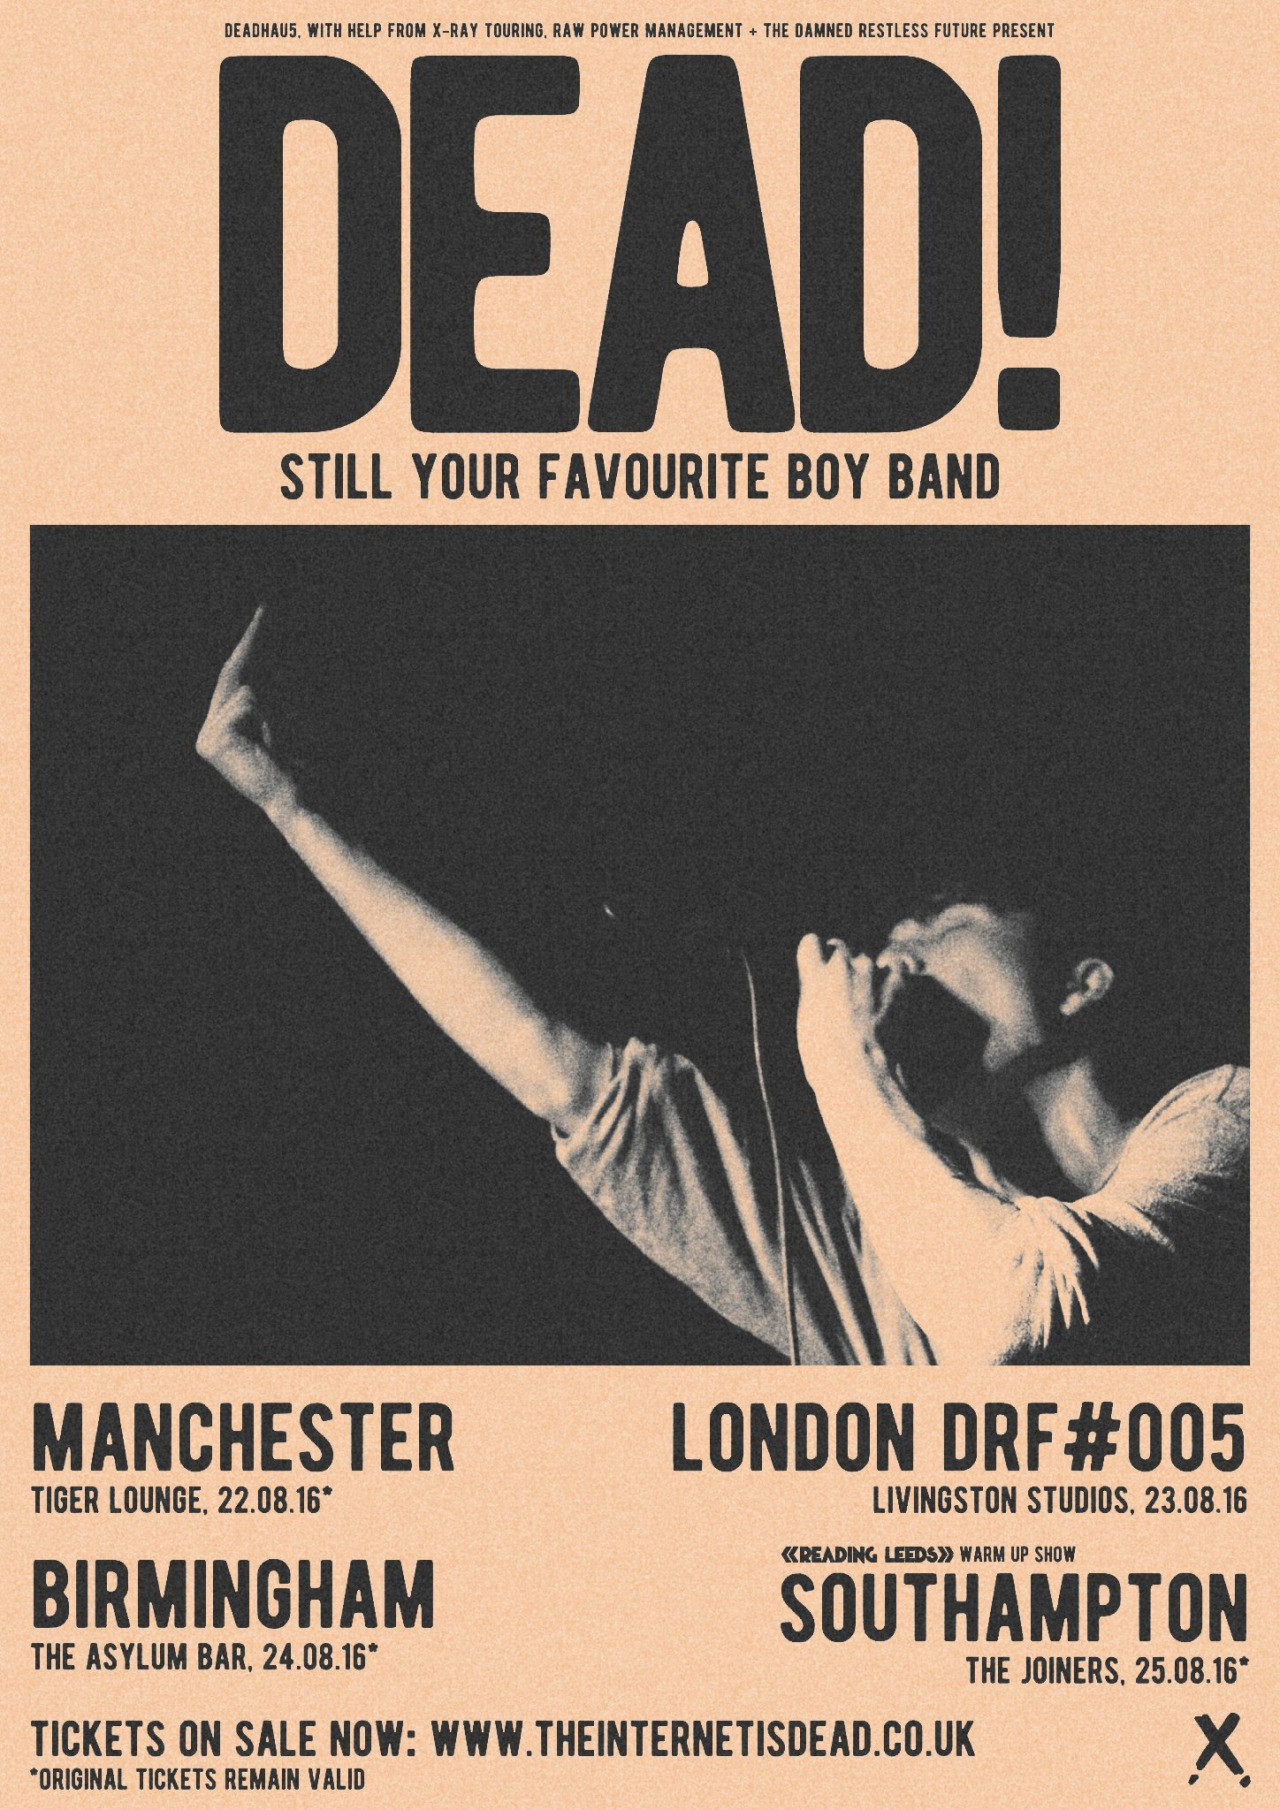 STILL YOUR FAVOURITE BOY BAND.
Manchester 22.08.16
London DRF#005 23.08.16
Birmingham 24.08.16
Southampton 25.08.16
Re-scheduled from April, tickets still valid. Fresh tickets available now.